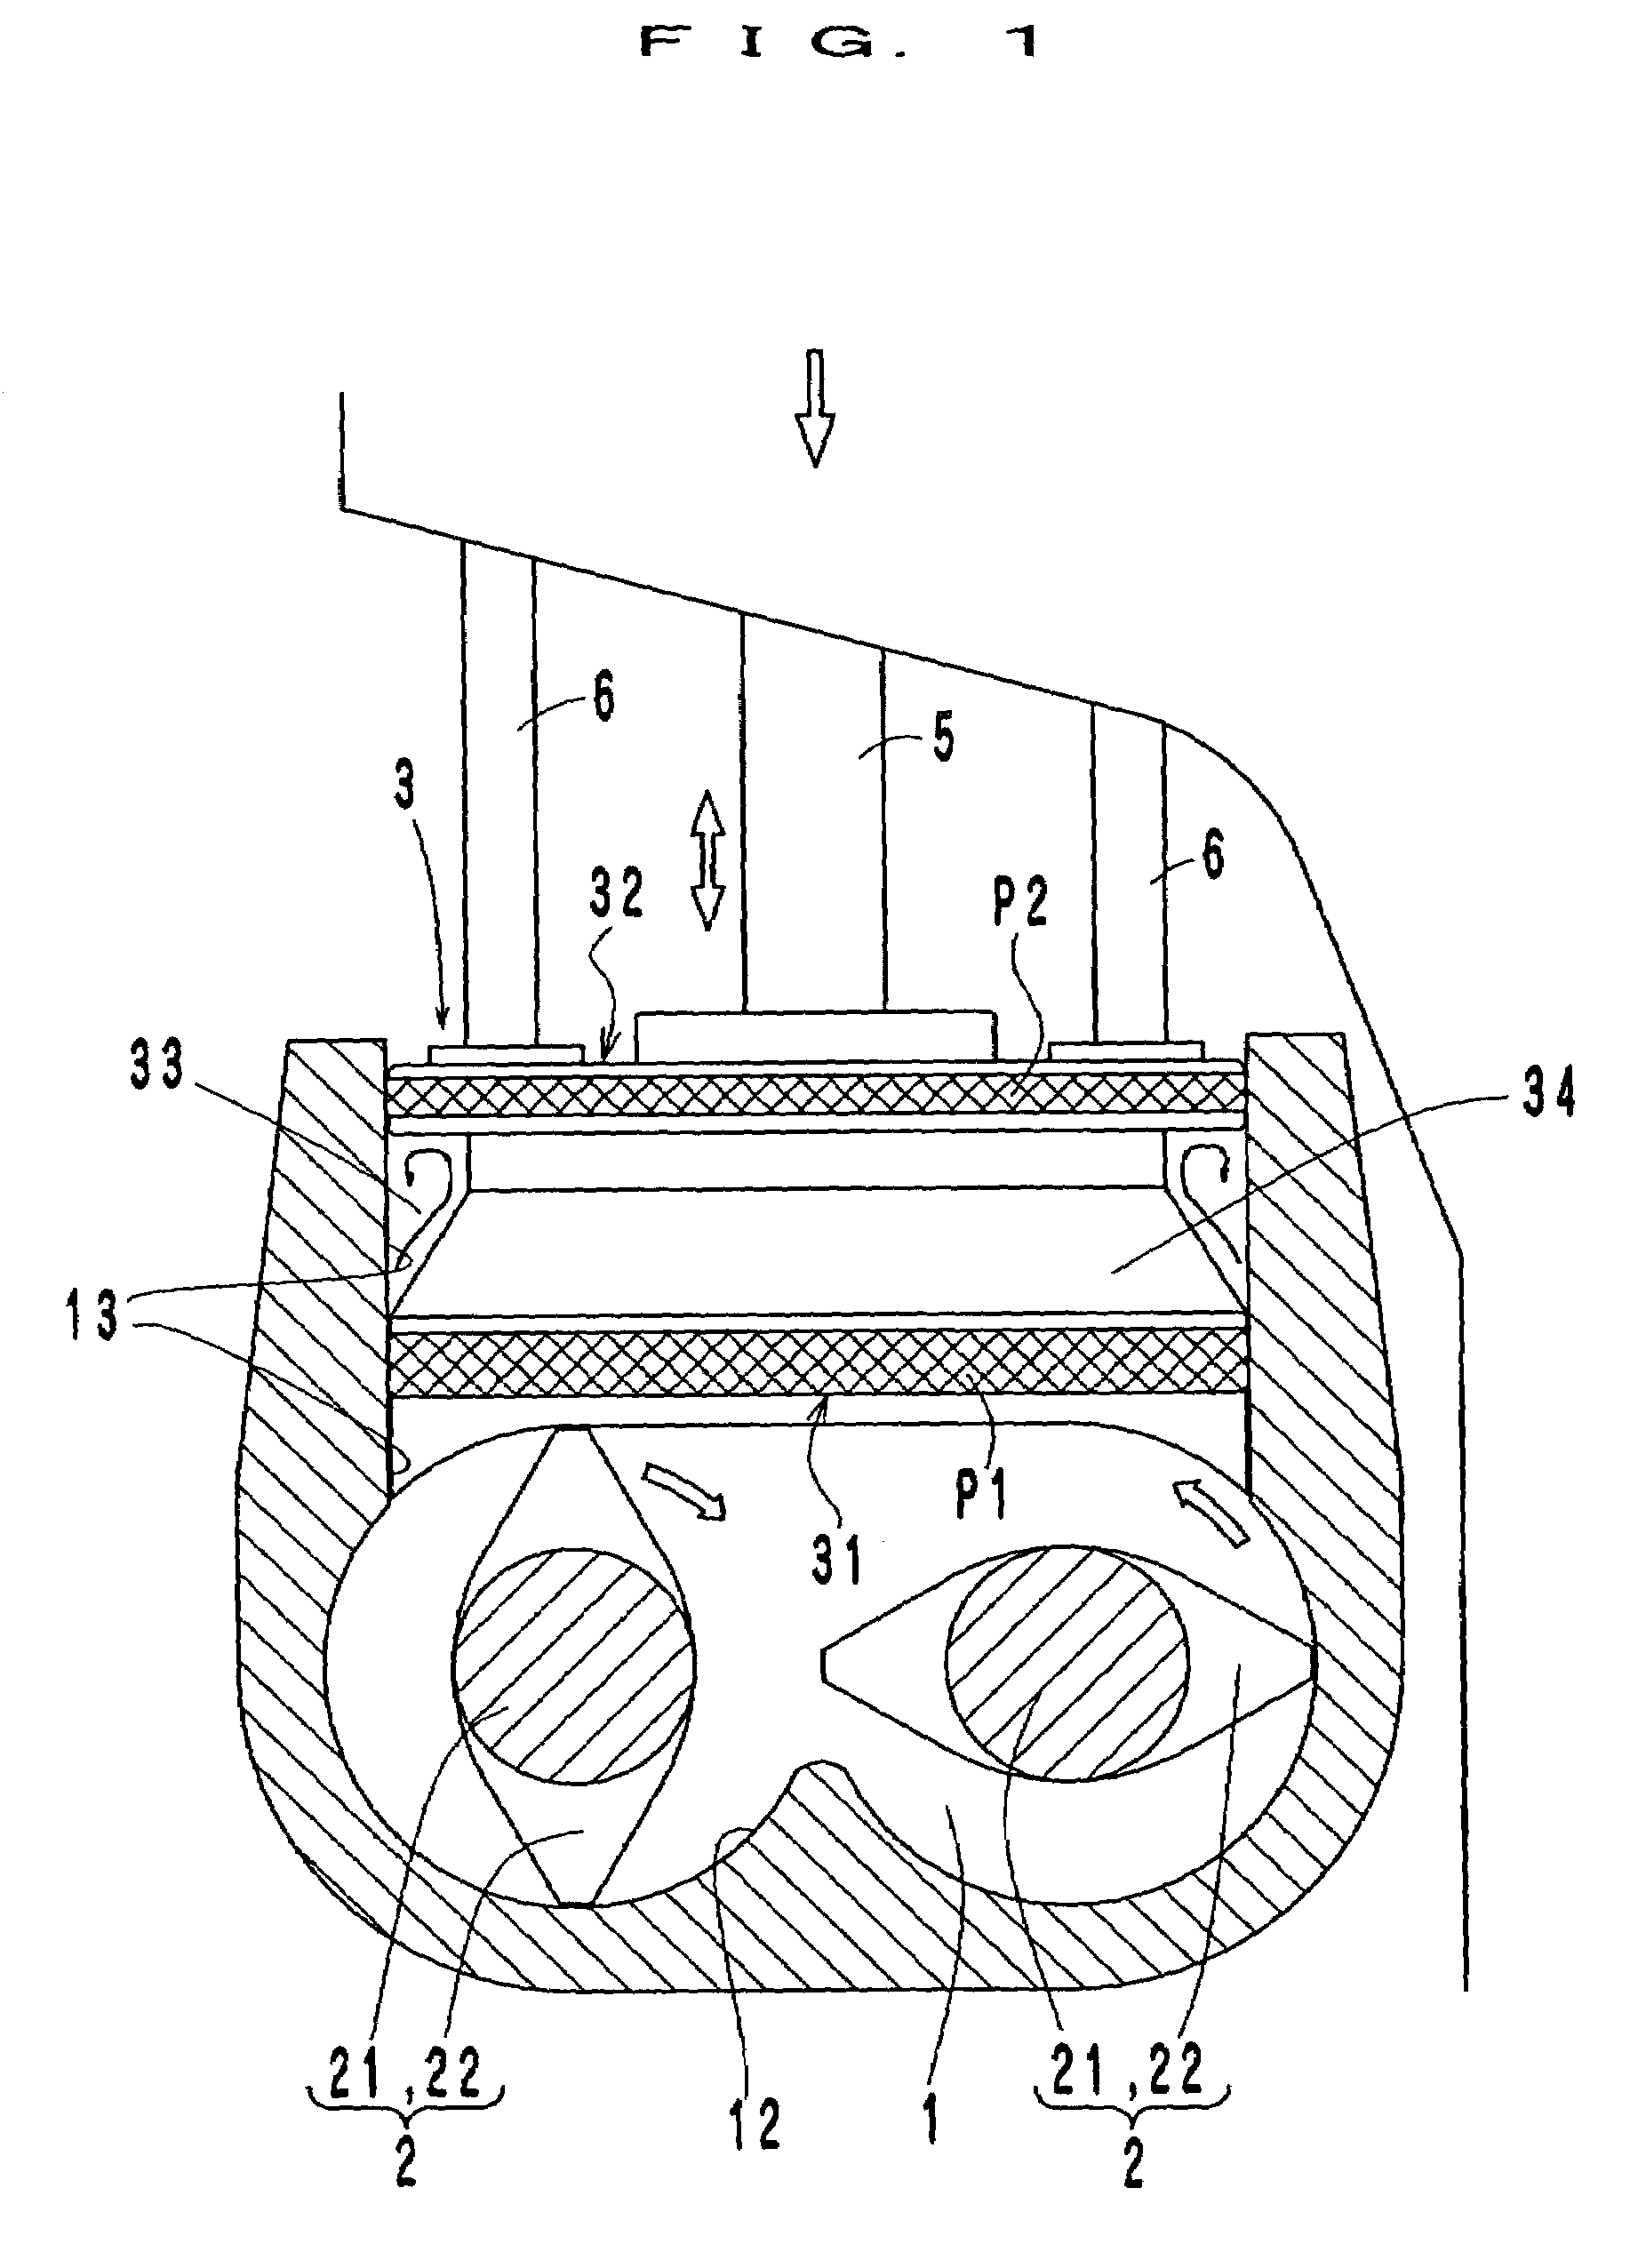 Pressurizing lid structure of a kneader